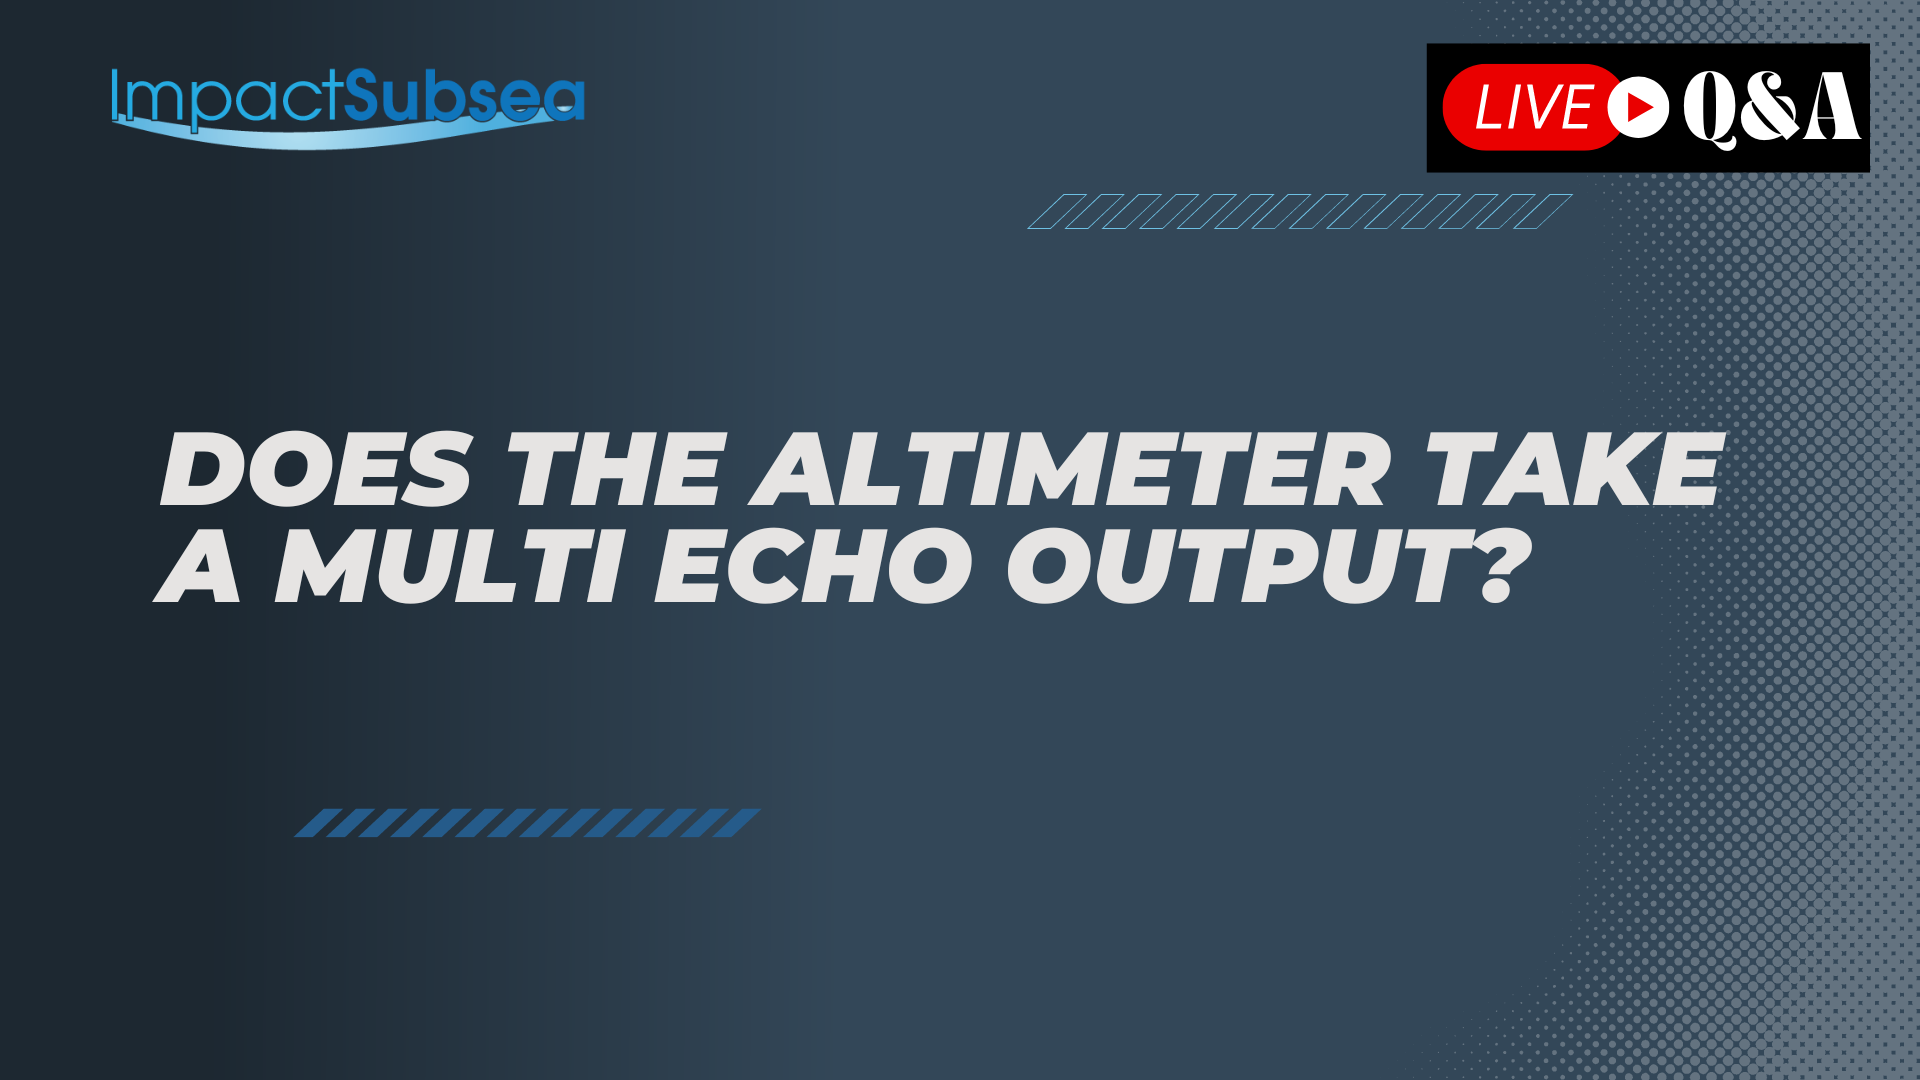 Does the altimeter take a multi echo output?